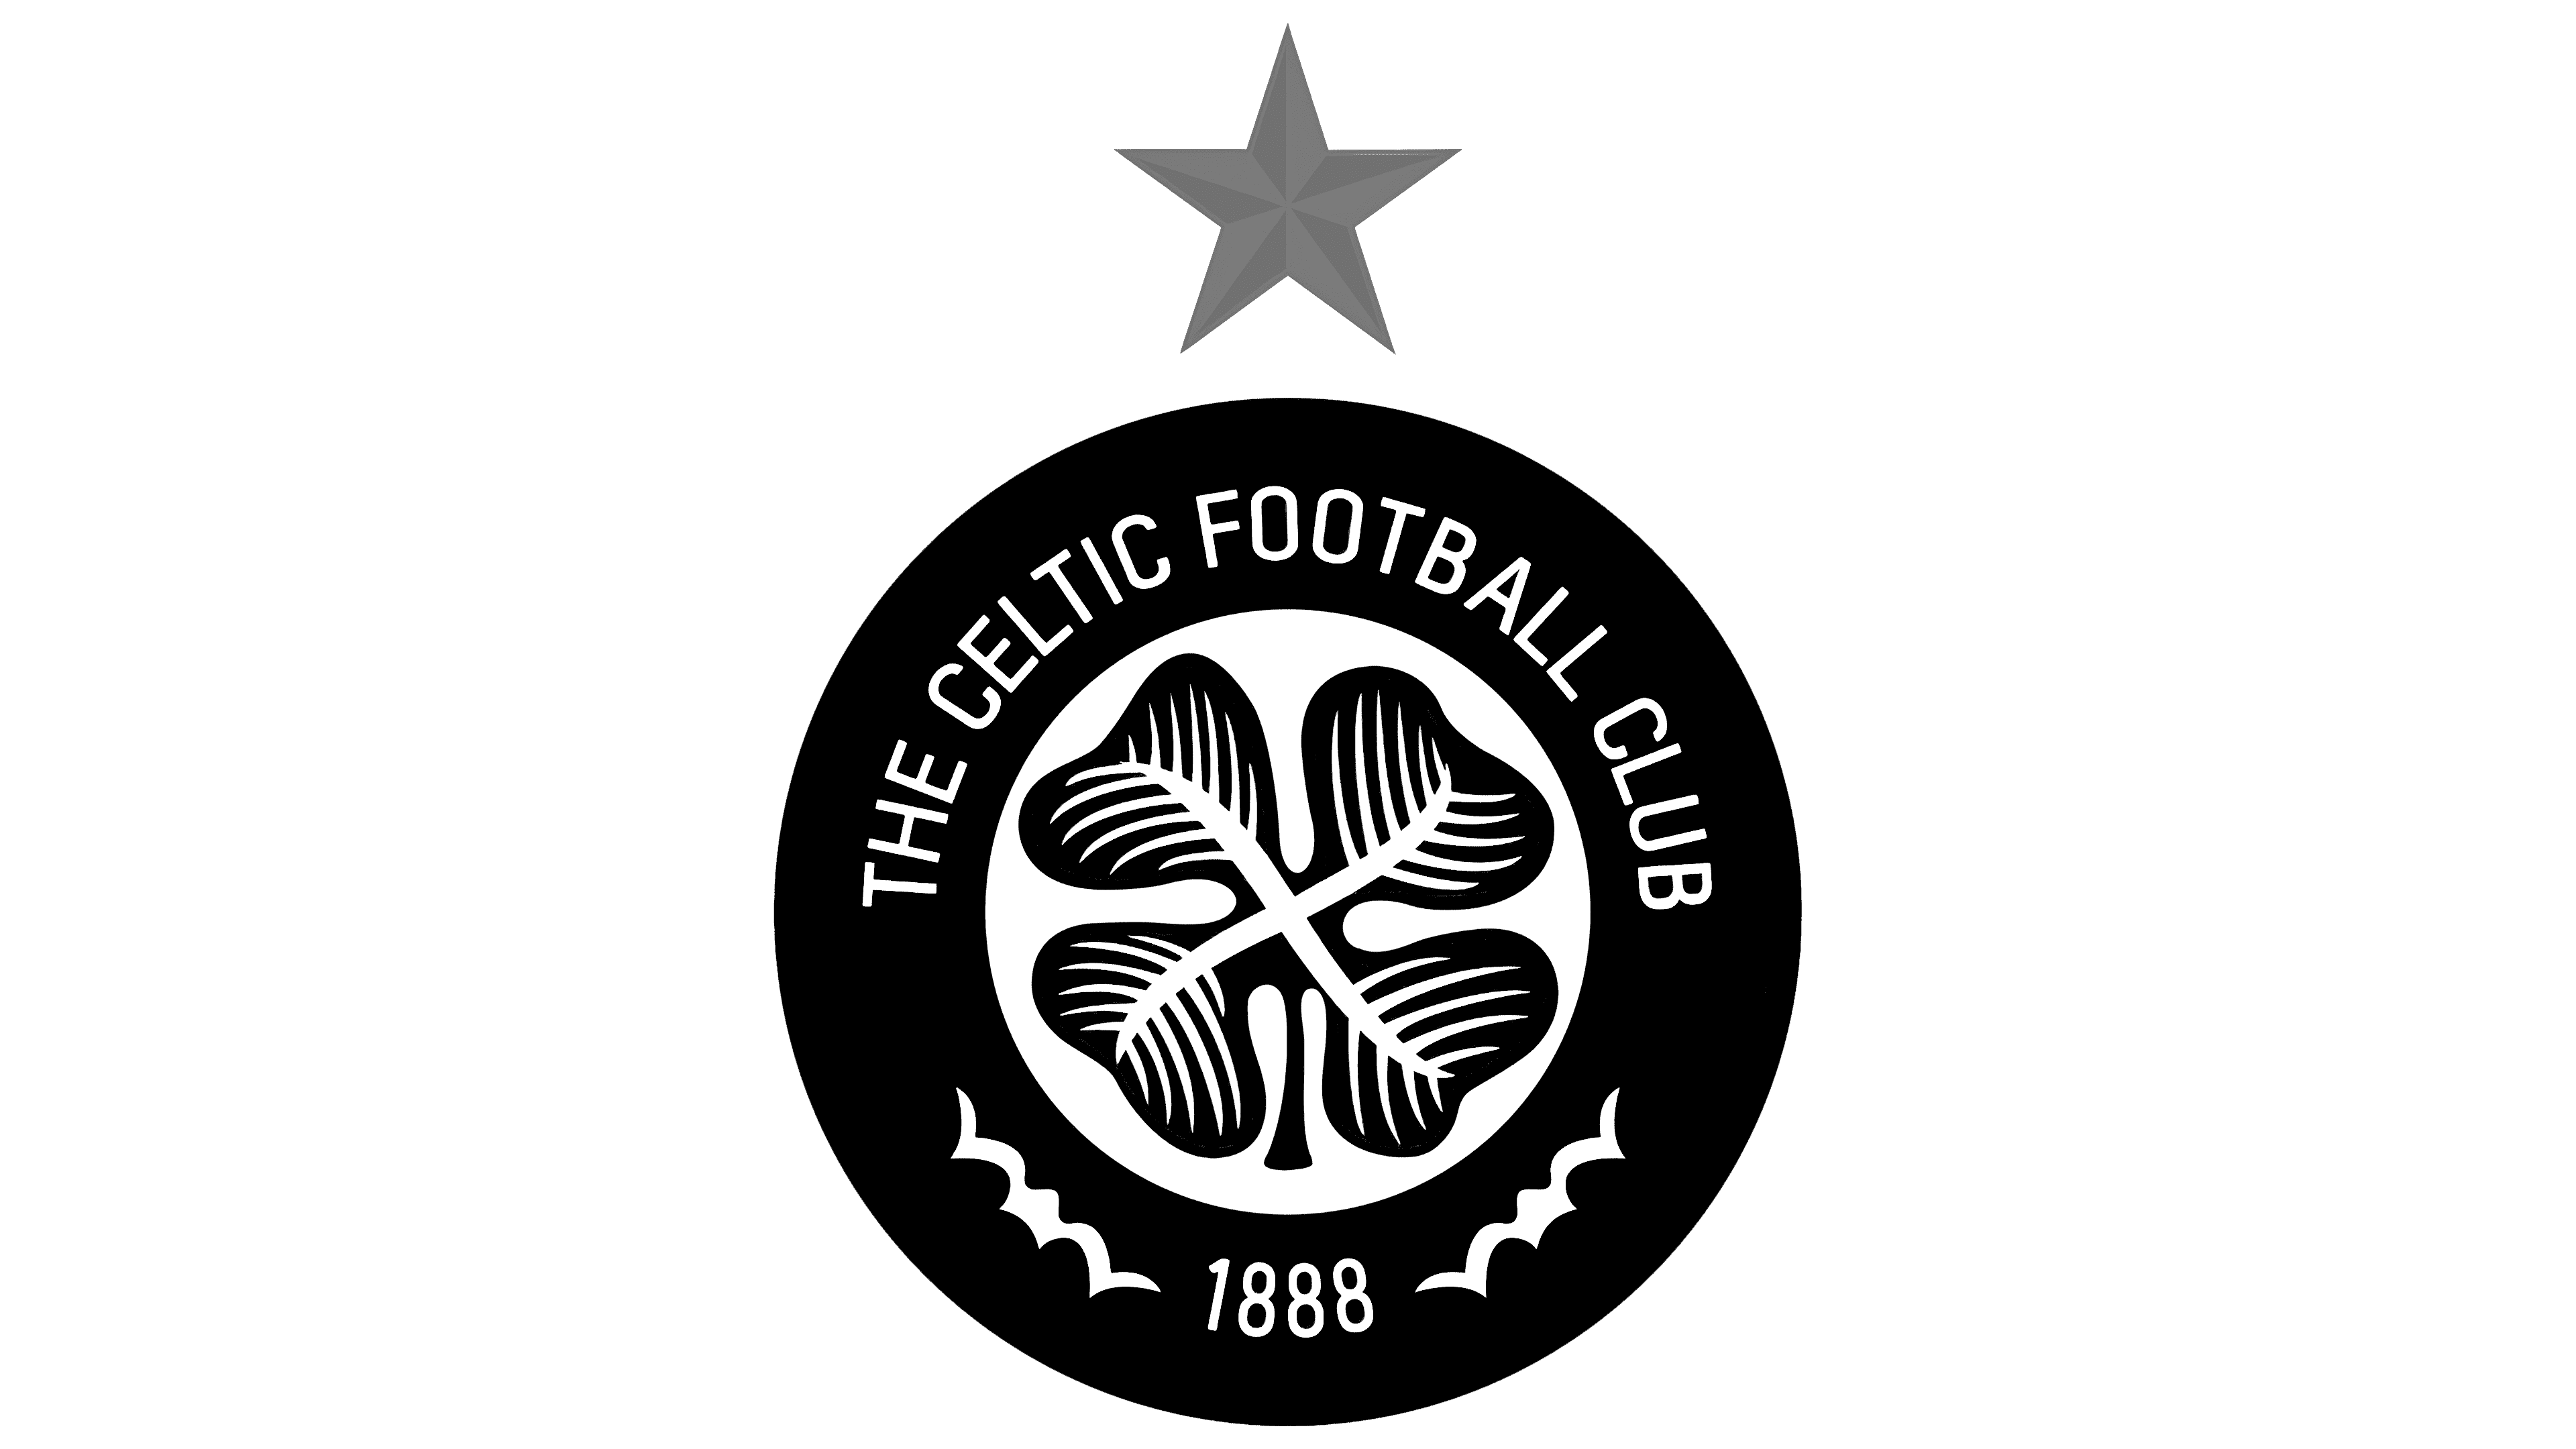 Celtic's badge: An element of mystery but a symbol of club's Irish